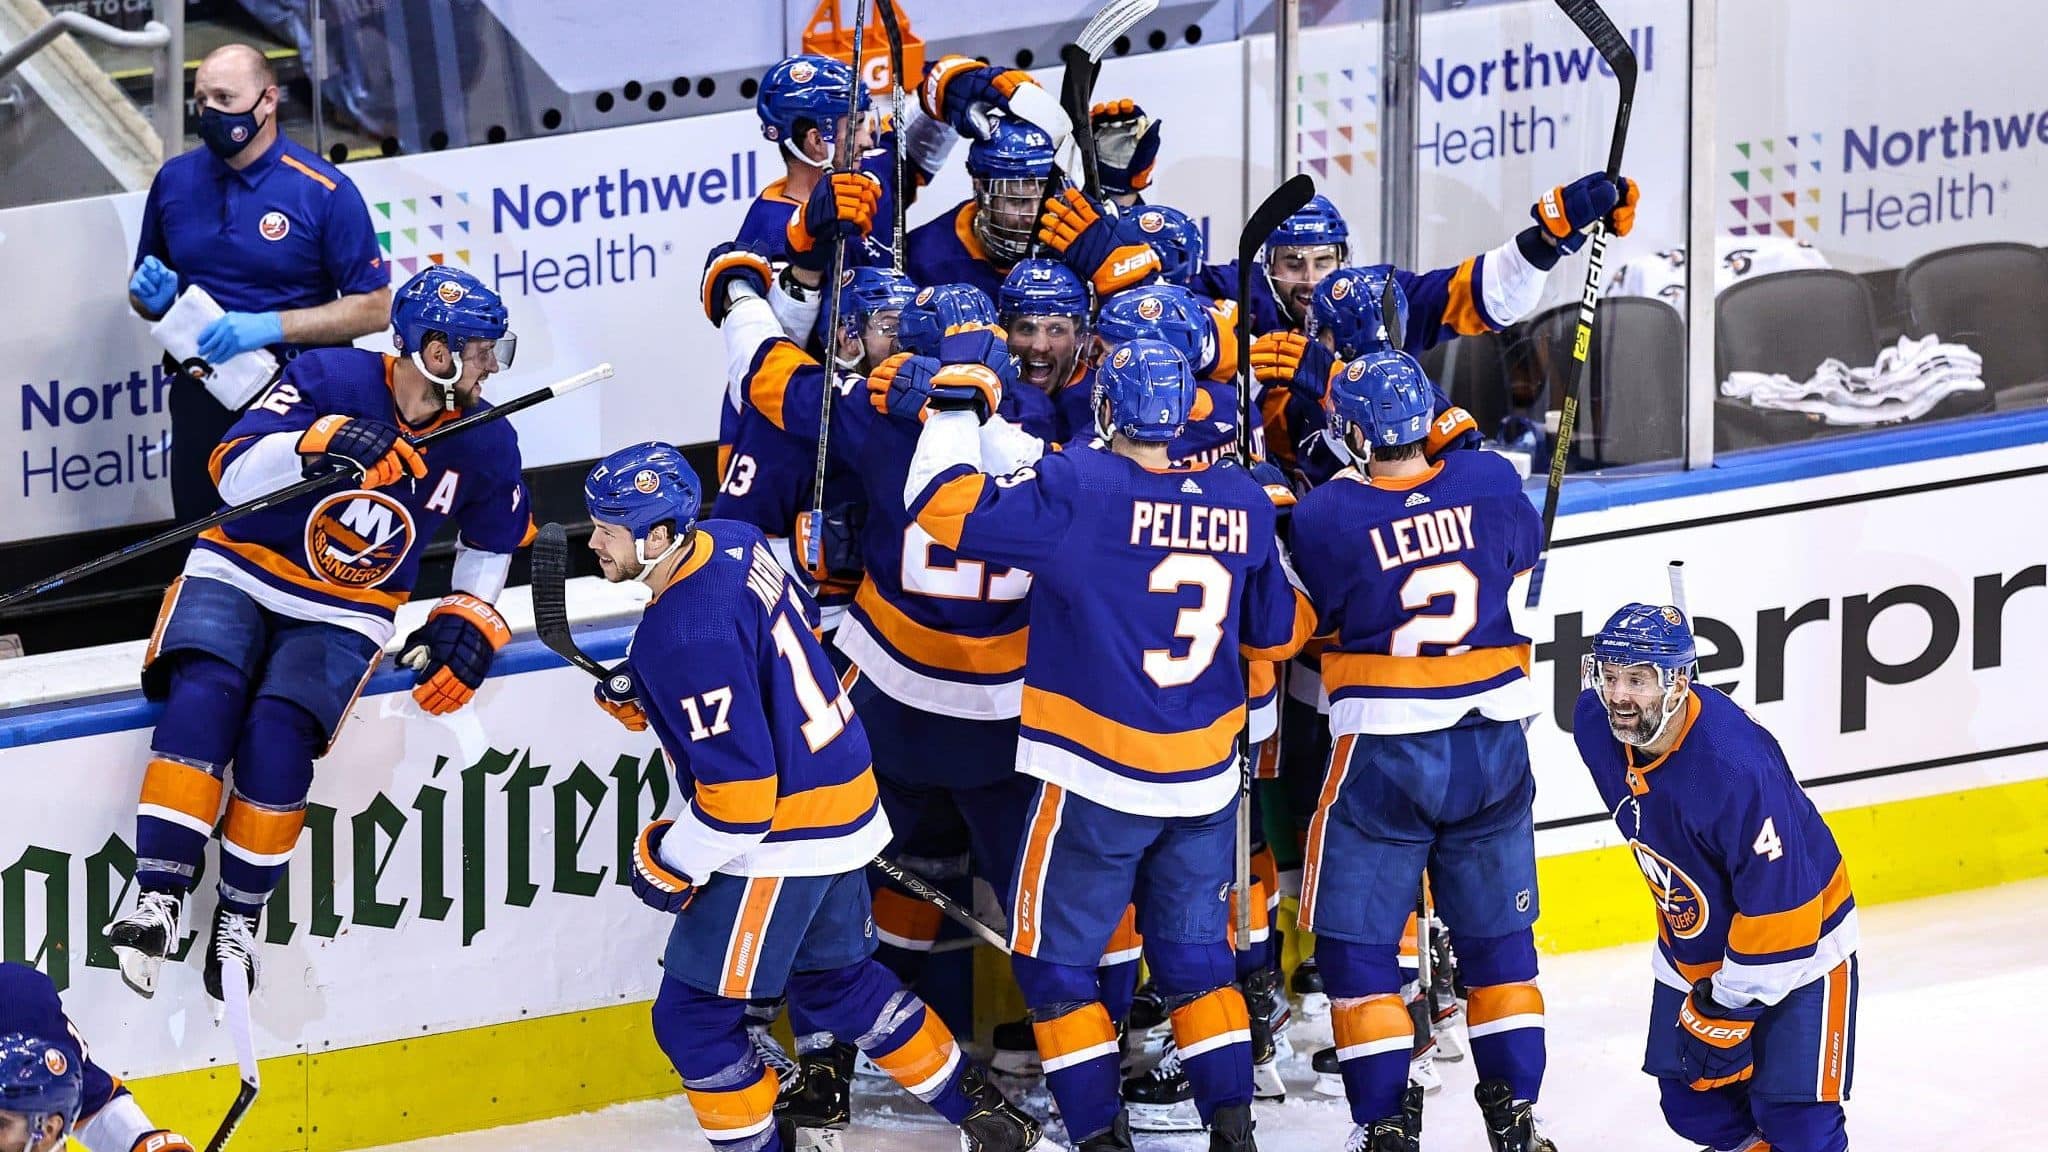 TORONTO, ONTARIO - AUGUST 16: The New York Islanders celebrate the game winning goal by Mathew Barzal #13 against the Washington Capitals during the first overtime period for a 2-1 win in Game Three of the Eastern Conference First Round during the 2020 NHL Stanley Cup Playoffs at Scotiabank Arena on August 16, 2020 in Toronto, Ontario.